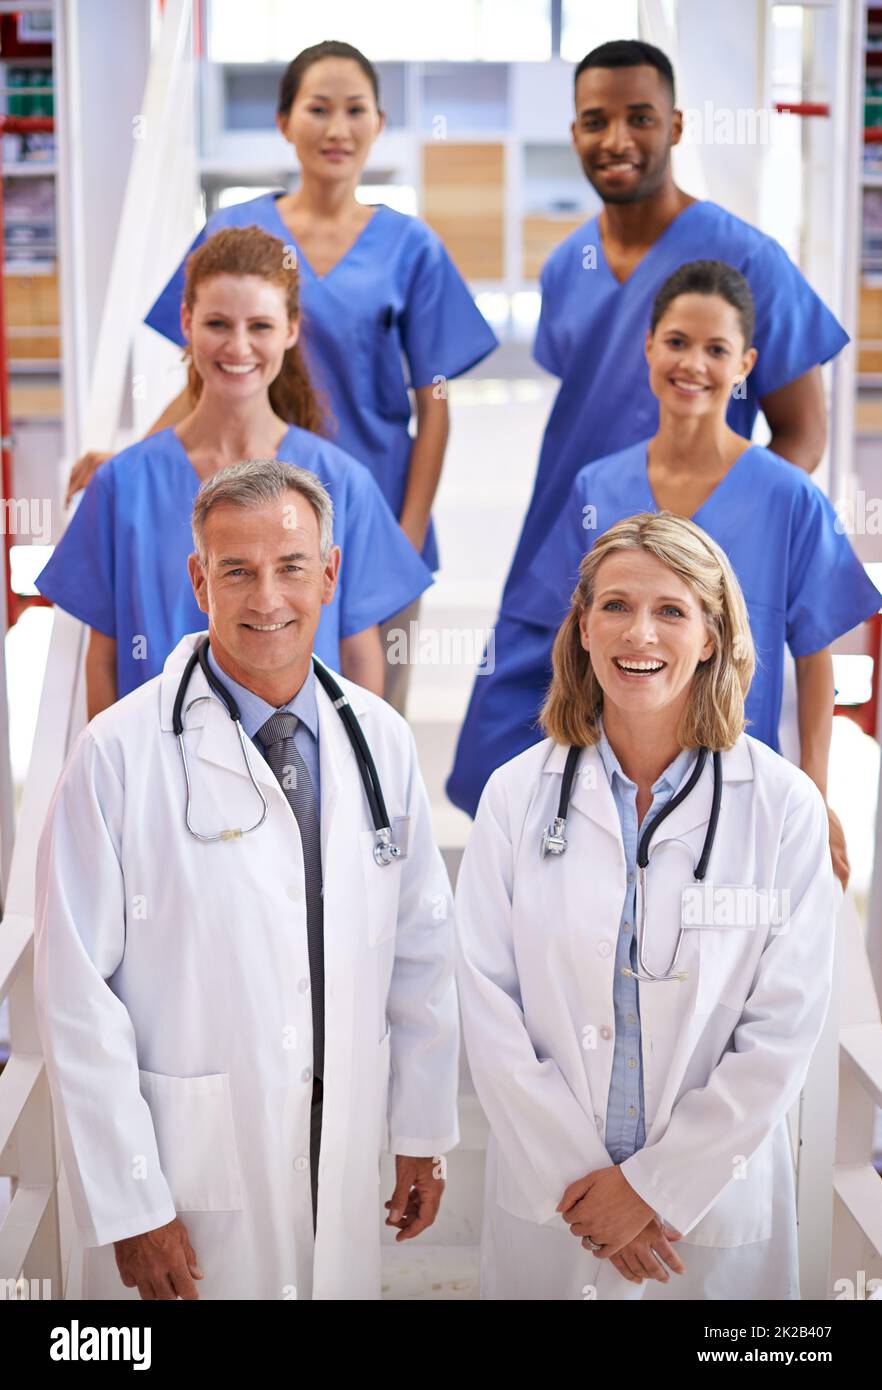 They will give you the best care possible. Portrait of a diverse team of medical professionals standing on a staircase in a hospital. Stock Photo